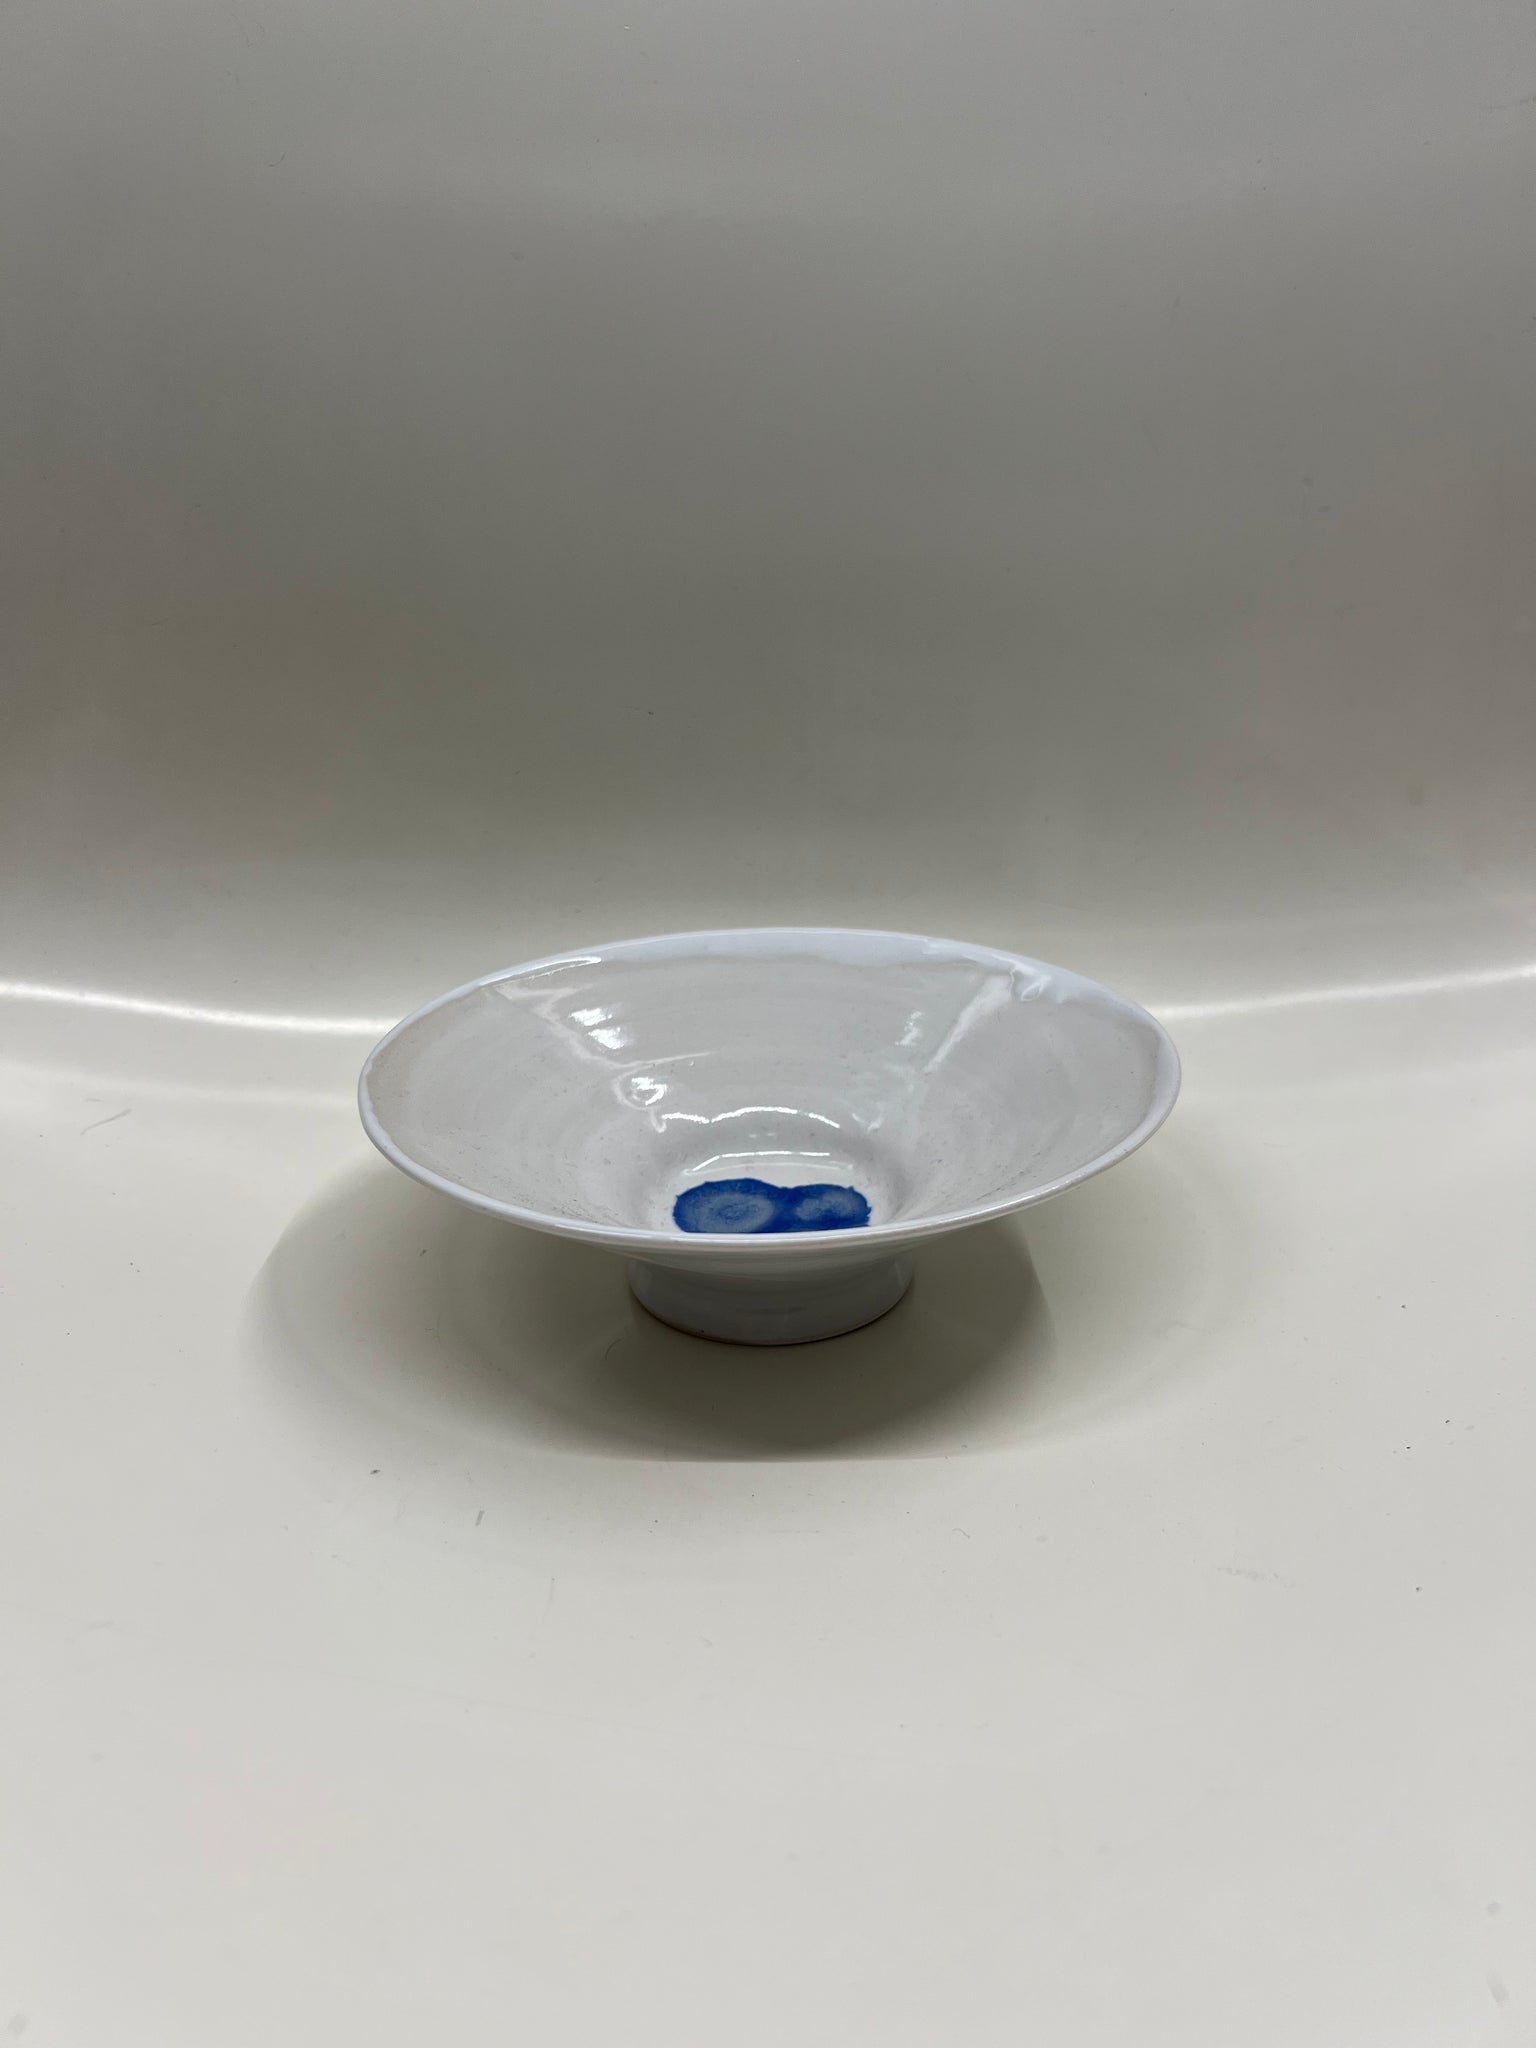 Small wide bowl in white with blue details by Jimu Kobayashi